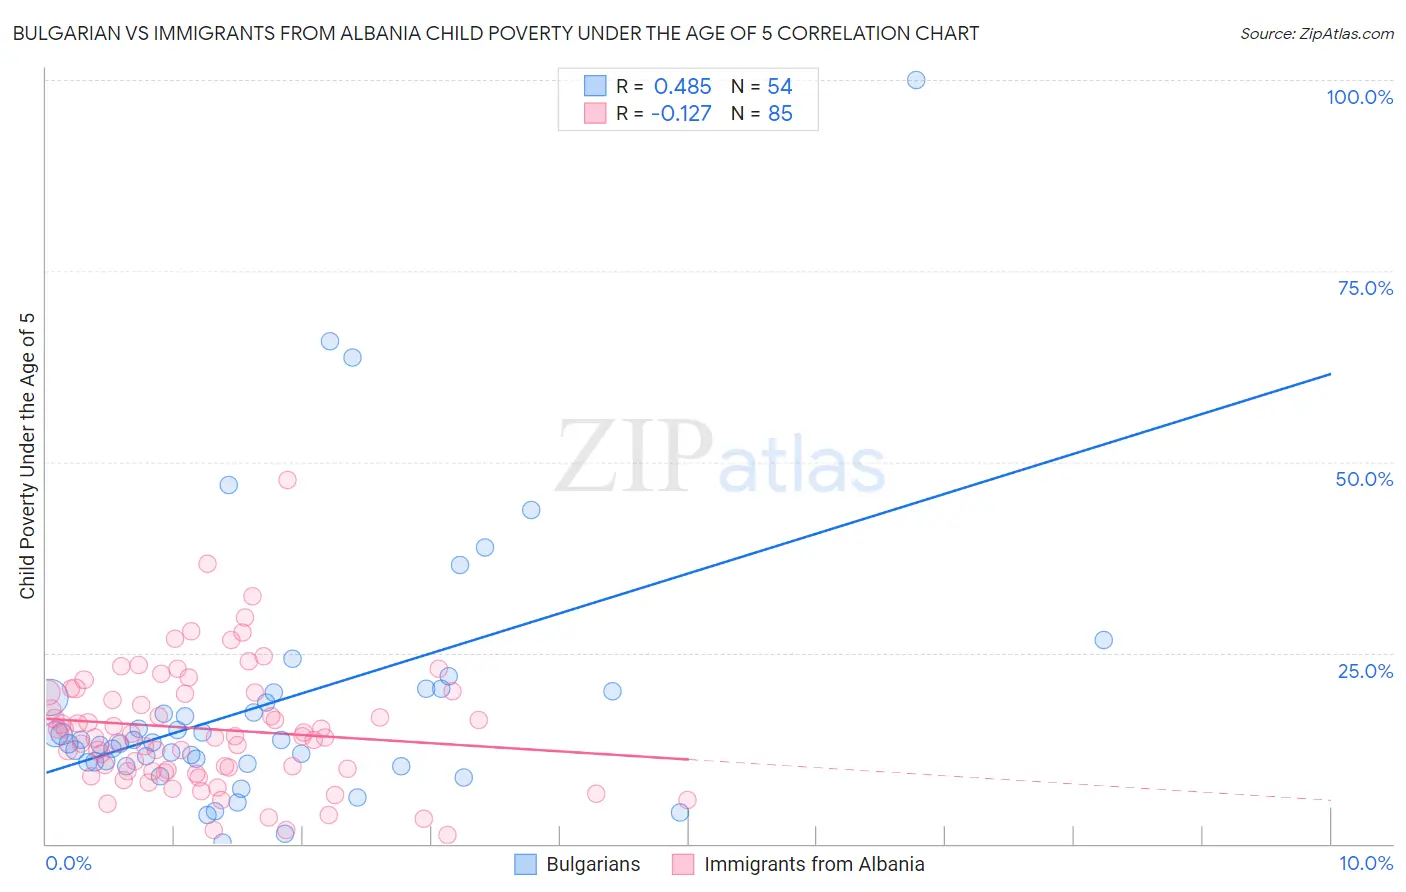 Bulgarian vs Immigrants from Albania Child Poverty Under the Age of 5